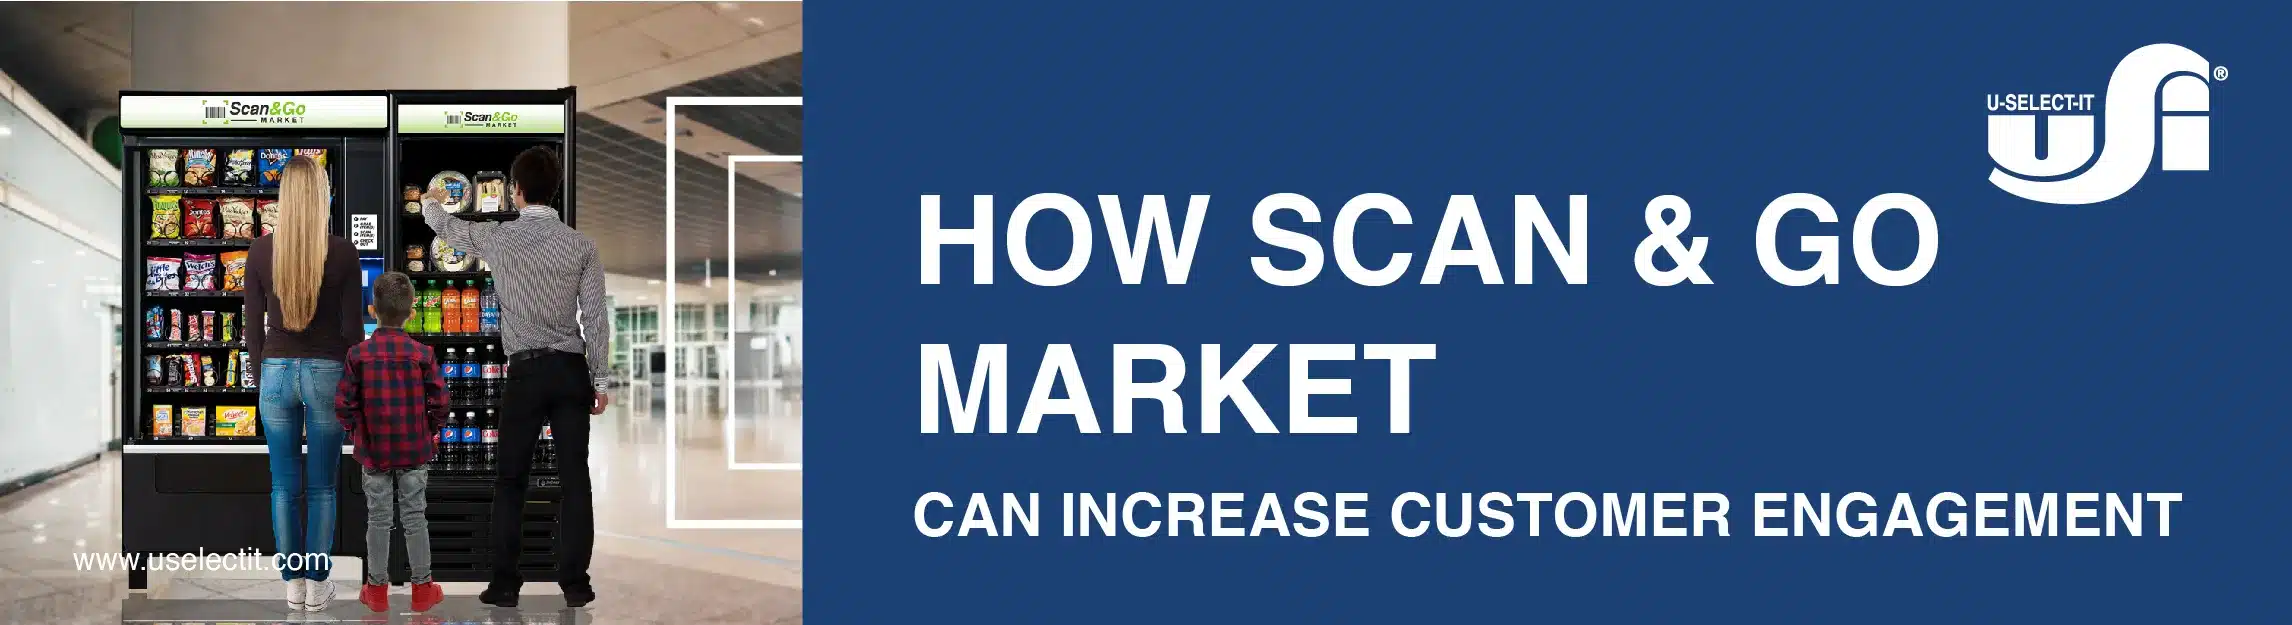 How Scan & Go Market Can Grow Your Business - uselectit vending machine